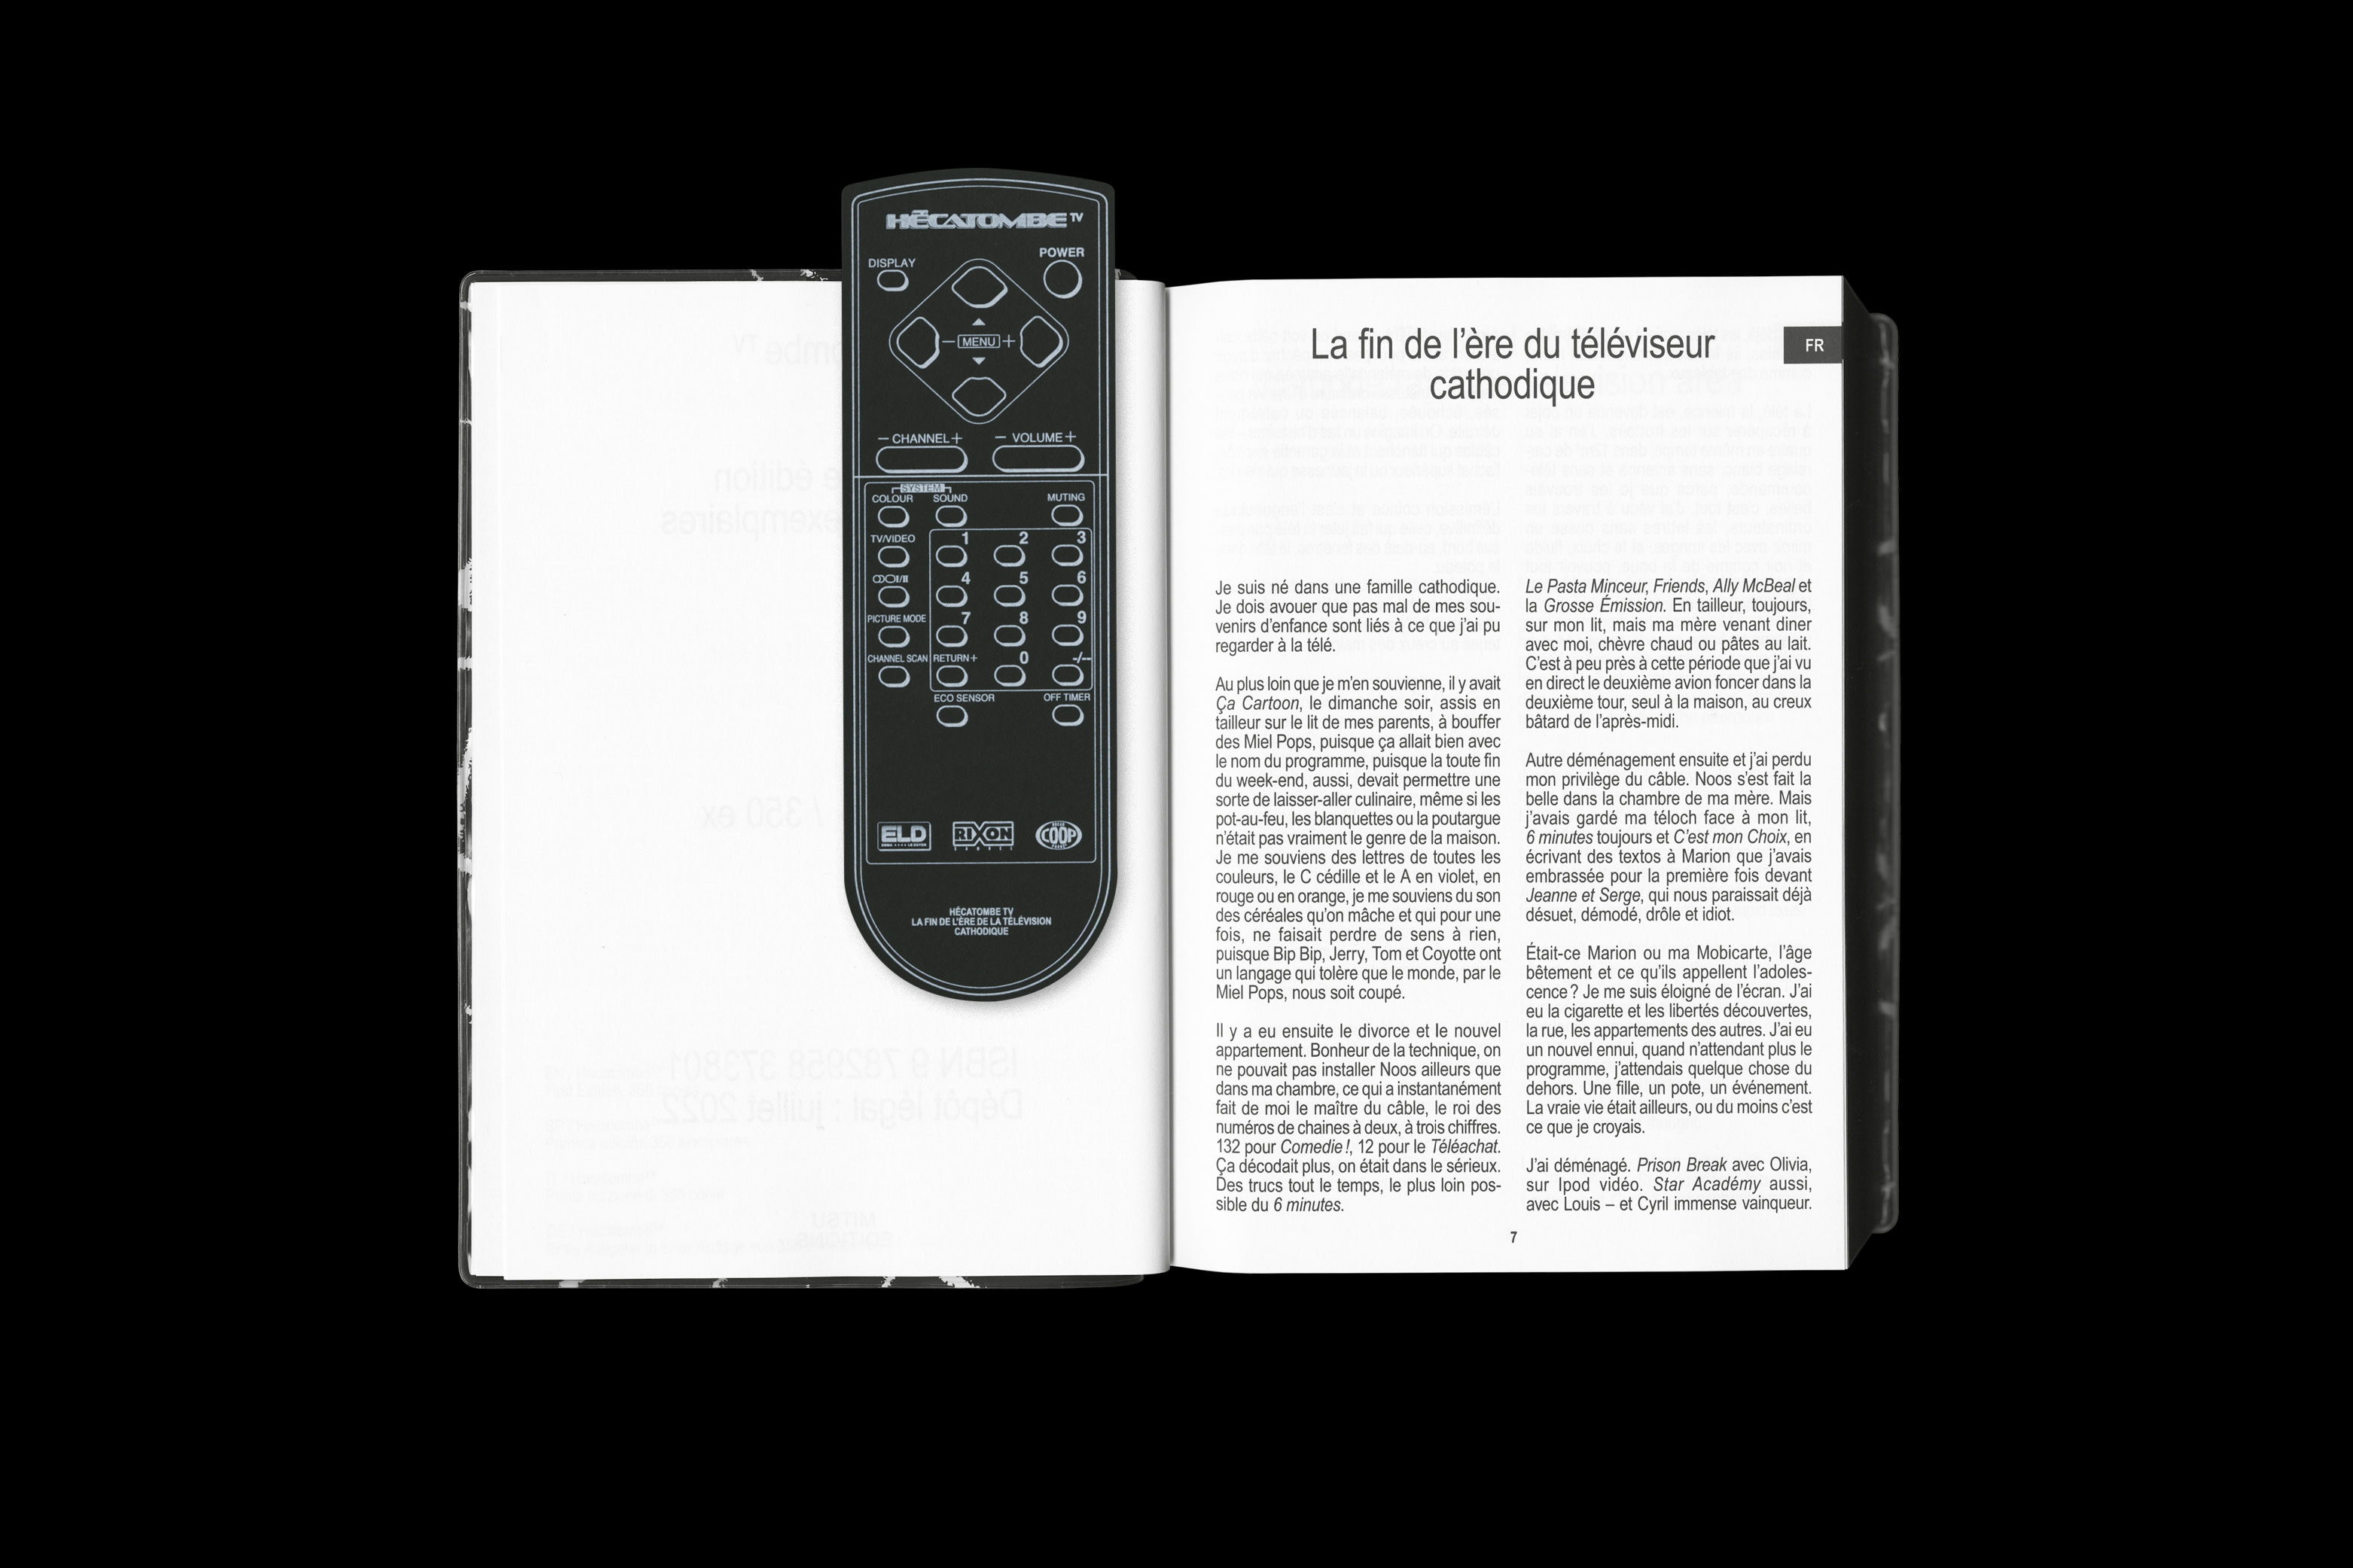 Hécatombe TV, edited by Mitsu Edition in 2022. 350 copies